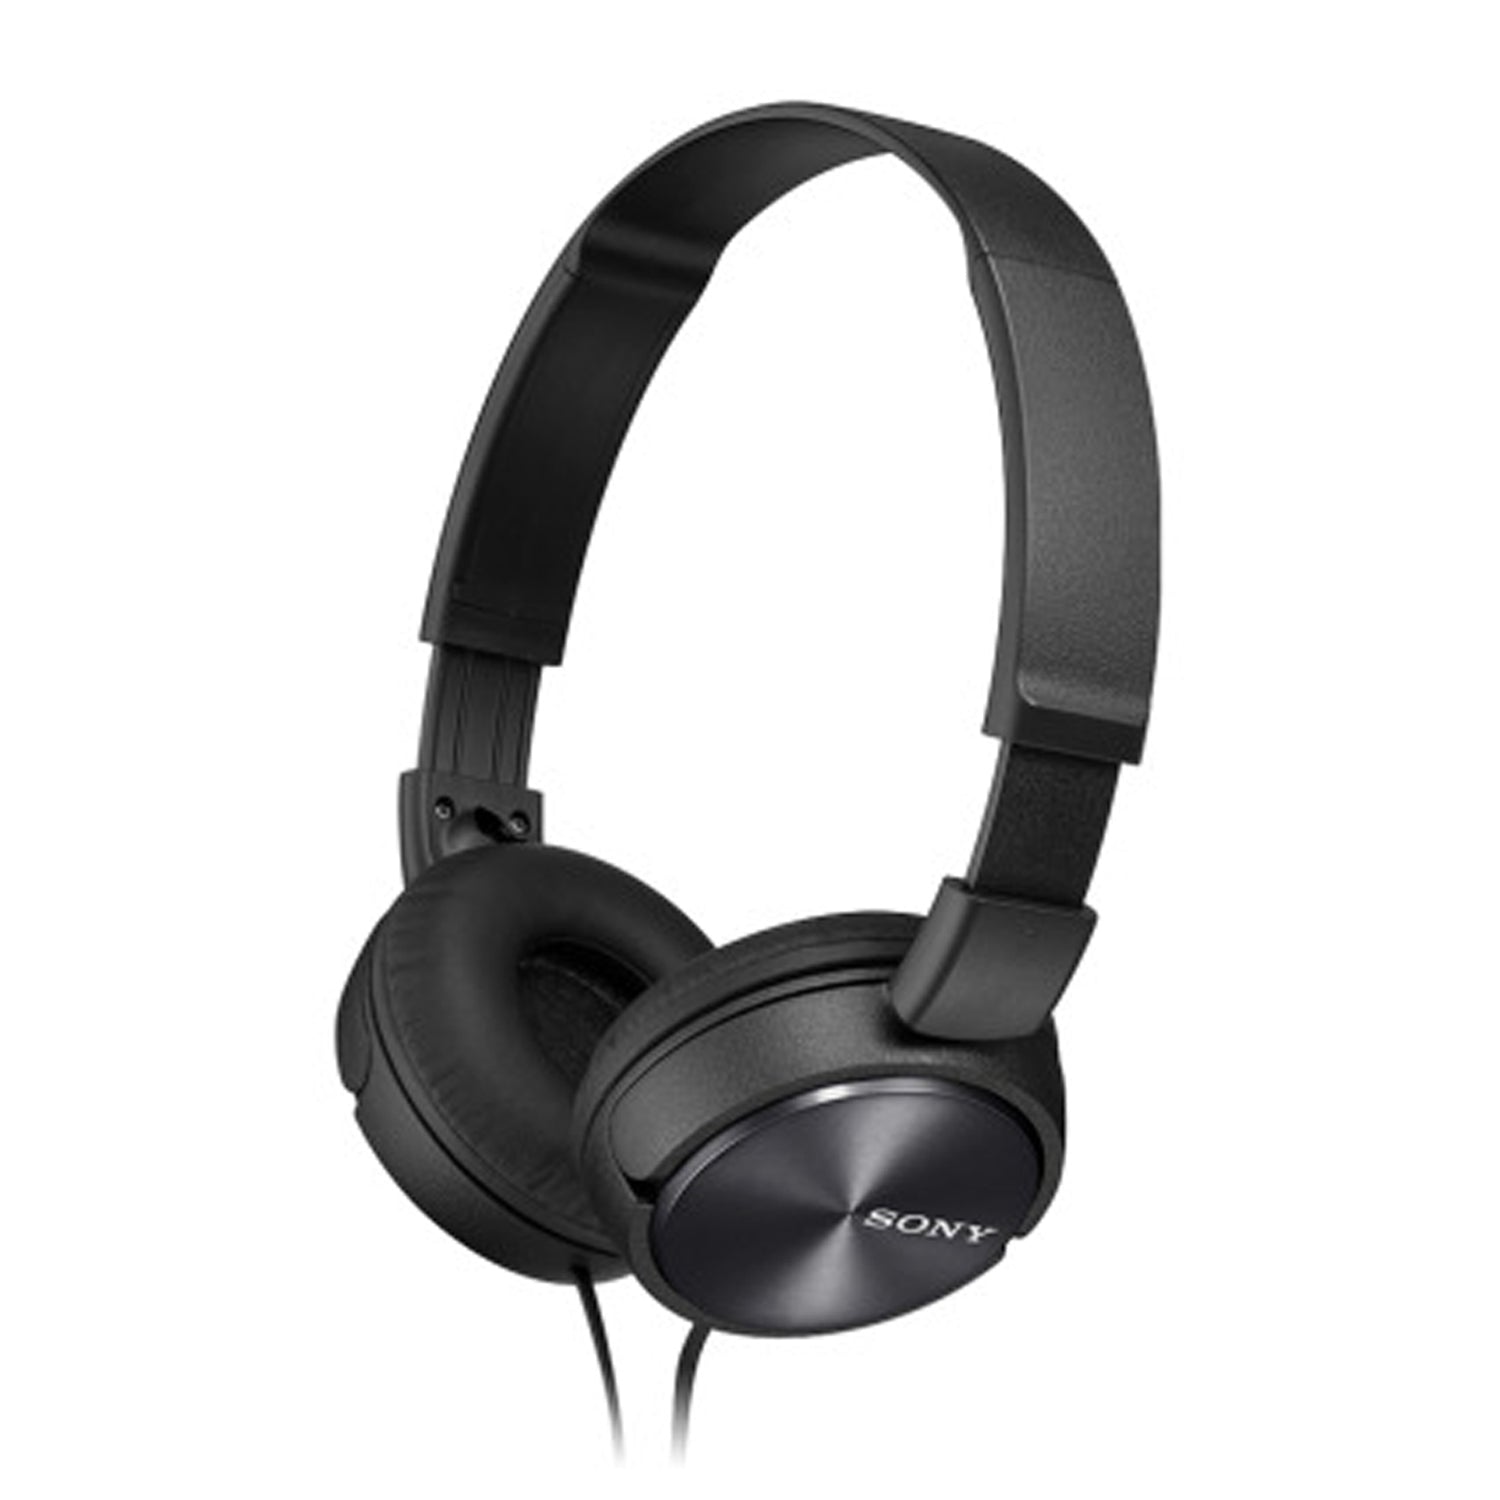 Sony Over the Ear Headphones with Mic